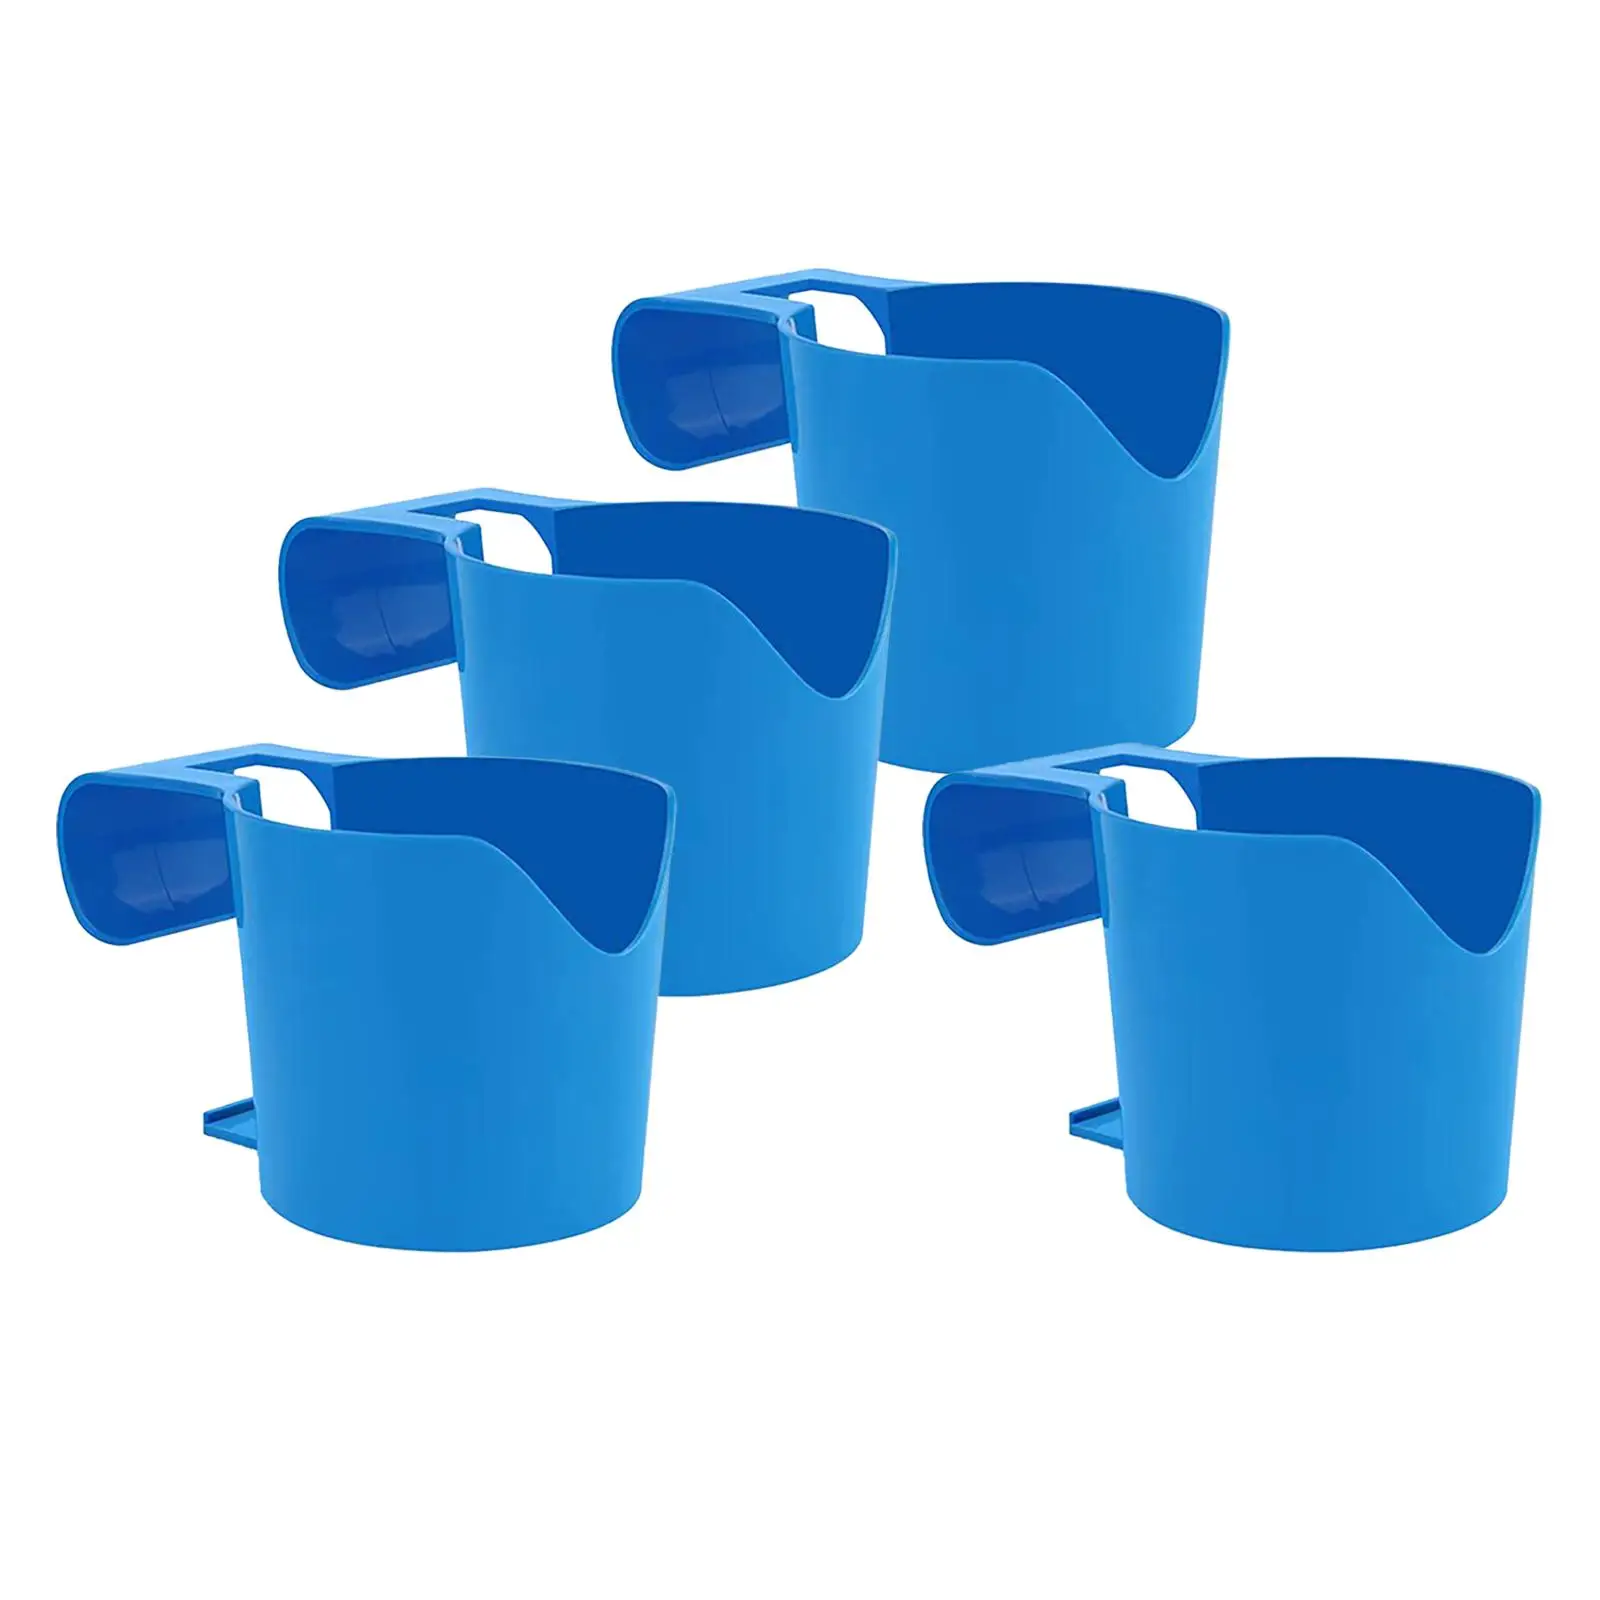 4Pcs Poolside Cup Holders Organize for above Ground Swimming Pool Pool Cup Holder for Bathtub Swimming Pool Side Beverage Beer